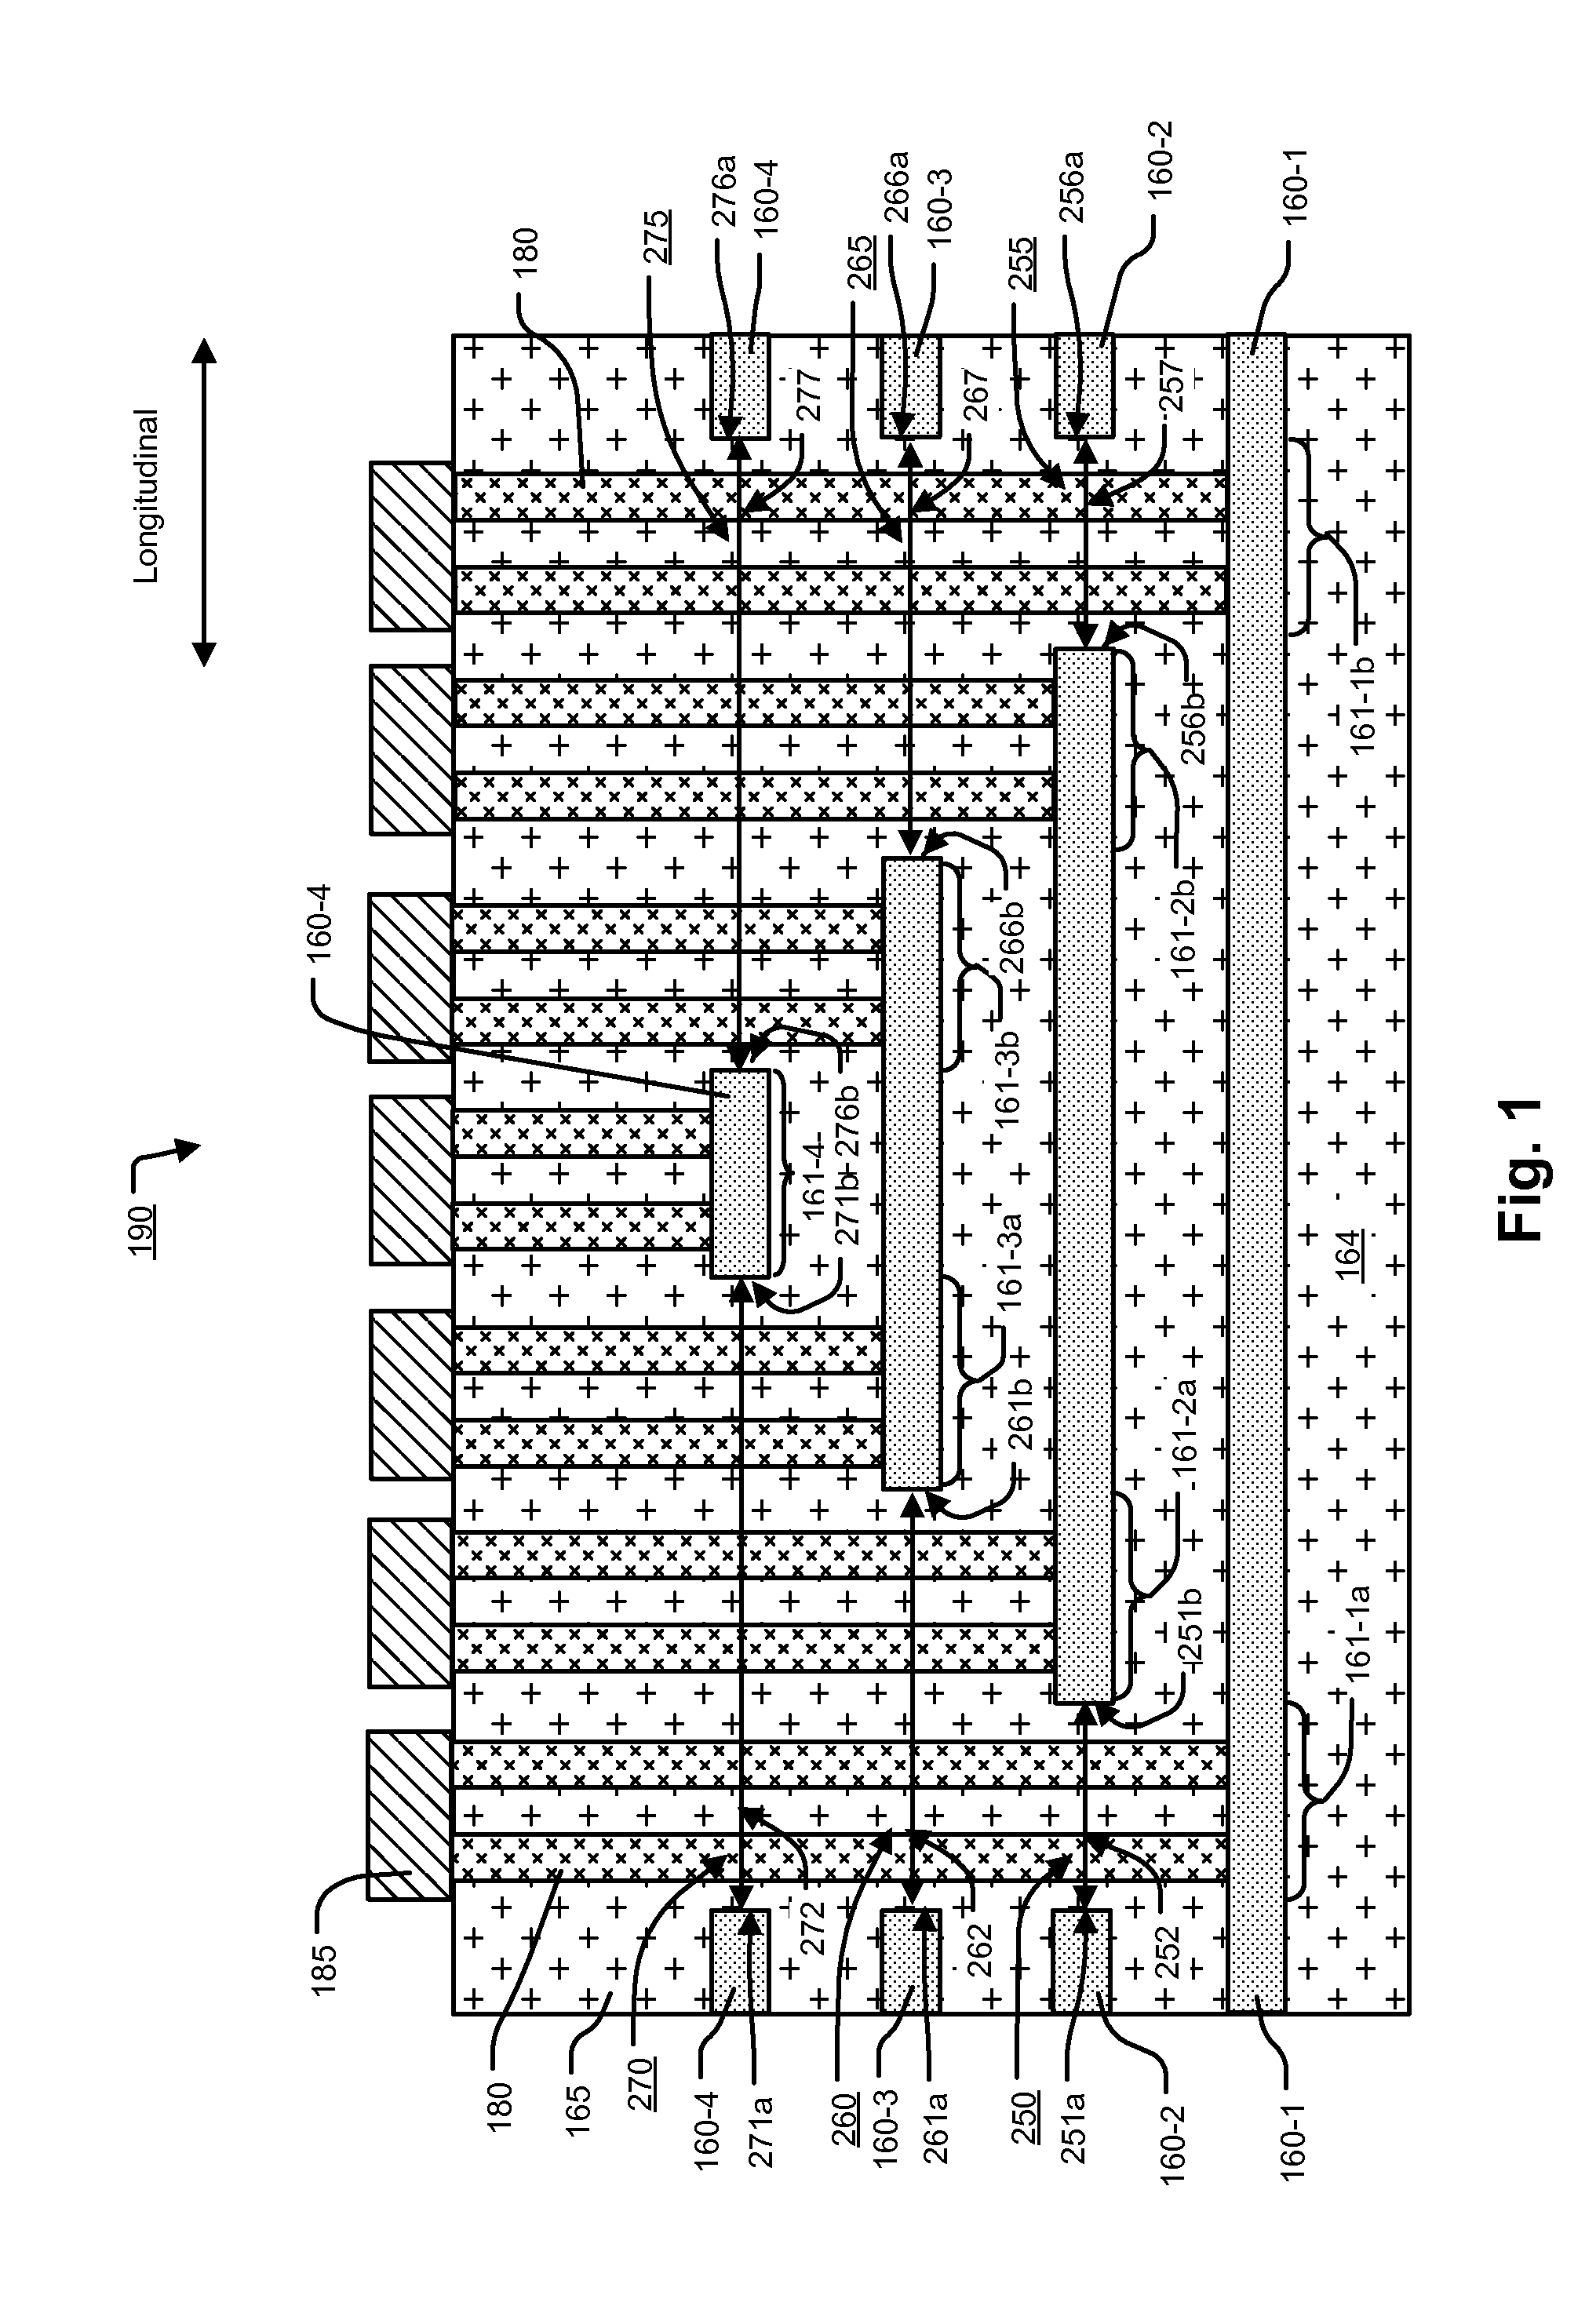 Reduced Number of Masks for IC Device with Stacked Contact Levels